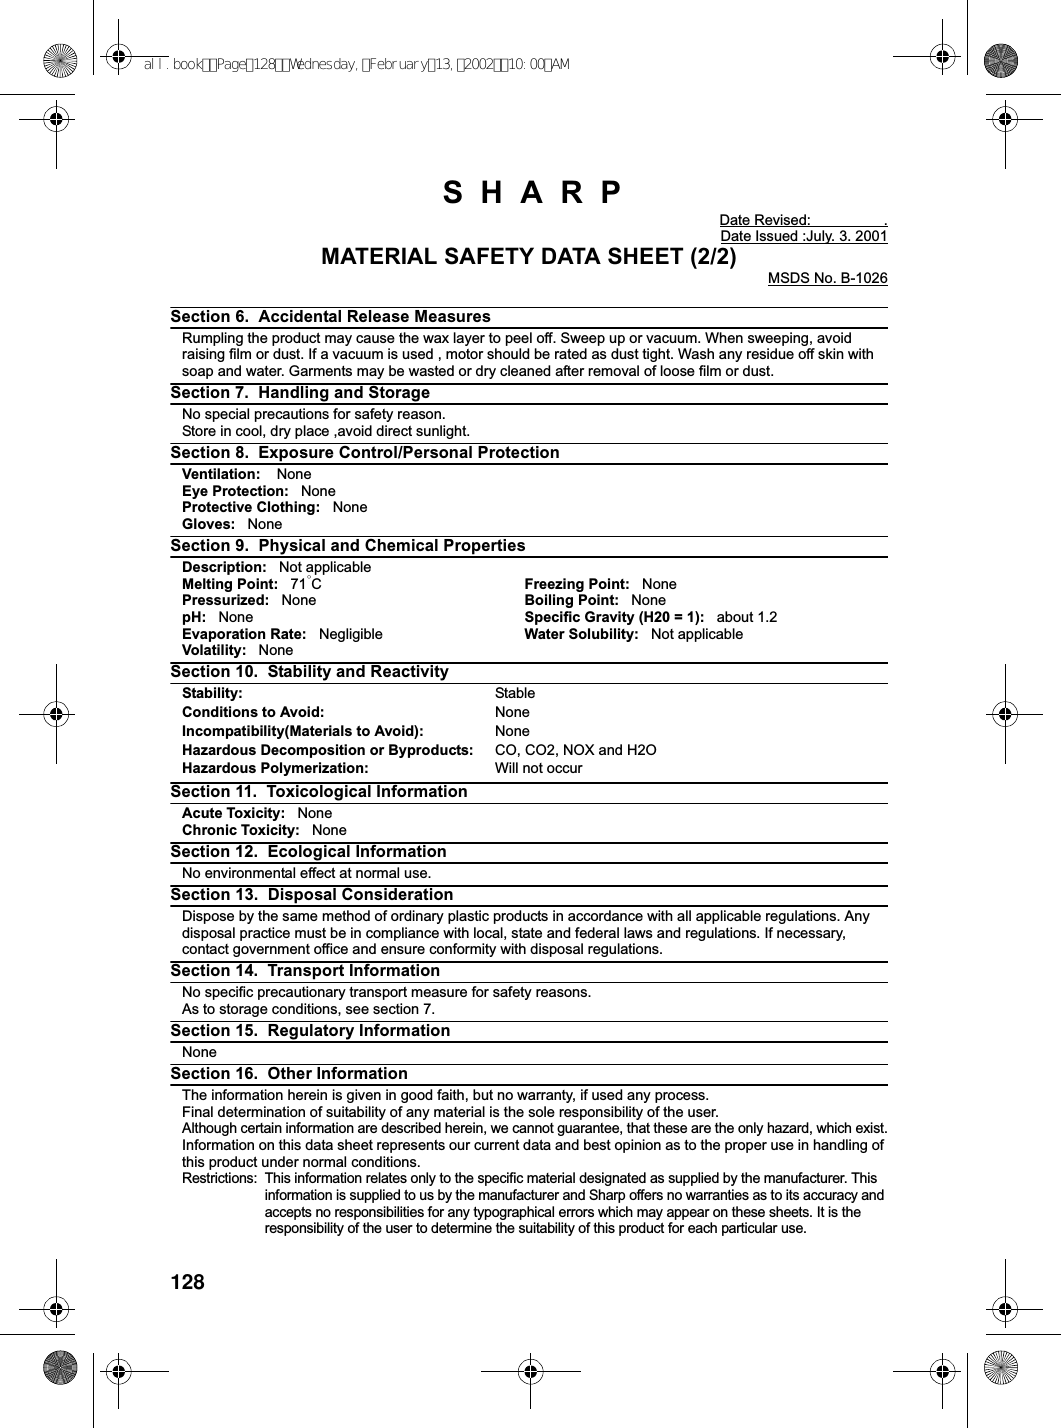 128SHARPDate Revised: .Date Issued :July. 3. 2001MATERIAL SAFETY DATA SHEET (2/2)MSDS No. B-1026Section 6. Accidental Release MeasuresRumpling the product may cause the wax layer to peel off. Sweep up or vacuum. When sweeping, avoidraising film or dust. If a vacuum is used , motor should be rated as dust tight. Wash any residue off skin withsoap and water. Garments may be wasted or dry cleaned after removal of loose film or dust.Section 7. Handling and StorageNo special precautions for safety reason.Store in cool, dry place ,avoid direct sunlight.Section 8. Exposure Control/Personal ProtectionVentilation: NoneEye Protection: NoneProtective Clothing: NoneGloves: NoneSection 9. Physical and Chemical PropertiesDescription: Not applicableMelting Point: 71°CFreezing Point: NonePressurized: None Boiling Point: NonepH: None Specific Gravity (H20 = 1): about 1.2Evaporation Rate: Negligible Water Solubility: Not applicableVolatility: NoneSection 10. Stability and ReactivityStability: StableConditions to Avoid: NoneIncompatibility(Materials to Avoid): NoneHazardous Decomposition or Byproducts: CO, CO2, NOX and H2OHazardous Polymerization: Will not occurSection 11. Toxicological InformationAcute Toxicity: NoneChronic Toxicity: NoneSection 12. Ecological InformationNo environmental effect at normal use.Section 13. Disposal ConsiderationDispose by the same method of ordinary plastic products in accordance with all applicable regulations. Anydisposal practice must be in compliance with local, state and federal laws and regulations. If necessary,contact government office and ensure conformity with disposal regulations.Section 14. Transport InformationNo specific precautionary transport measure for safety reasons.As to storage conditions, see section 7.Section 15. Regulatory InformationNoneSection 16. Other InformationThe information herein is given in good faith, but no warranty, if used any process.Final determination of suitability of any material is the sole responsibility of the user.Although certain information are described herein, we cannot guarantee, that these are the only hazard, which exist.Information on this data sheet represents our current data and best opinion as to the proper use in handling ofthis product under normal conditions.Restrictions: This information relates only to the specific material designated as supplied by the manufacturer. Thisinformation is supplied to us by the manufacturer and Sharp offers no warranties as to its accuracy andaccepts no responsibilities for any typographical errors which may appear on these sheets. It is theresponsibility of the user to determine the suitability of this product for each particular use.all.bookPage128Wednesday,February13,200210:00AM